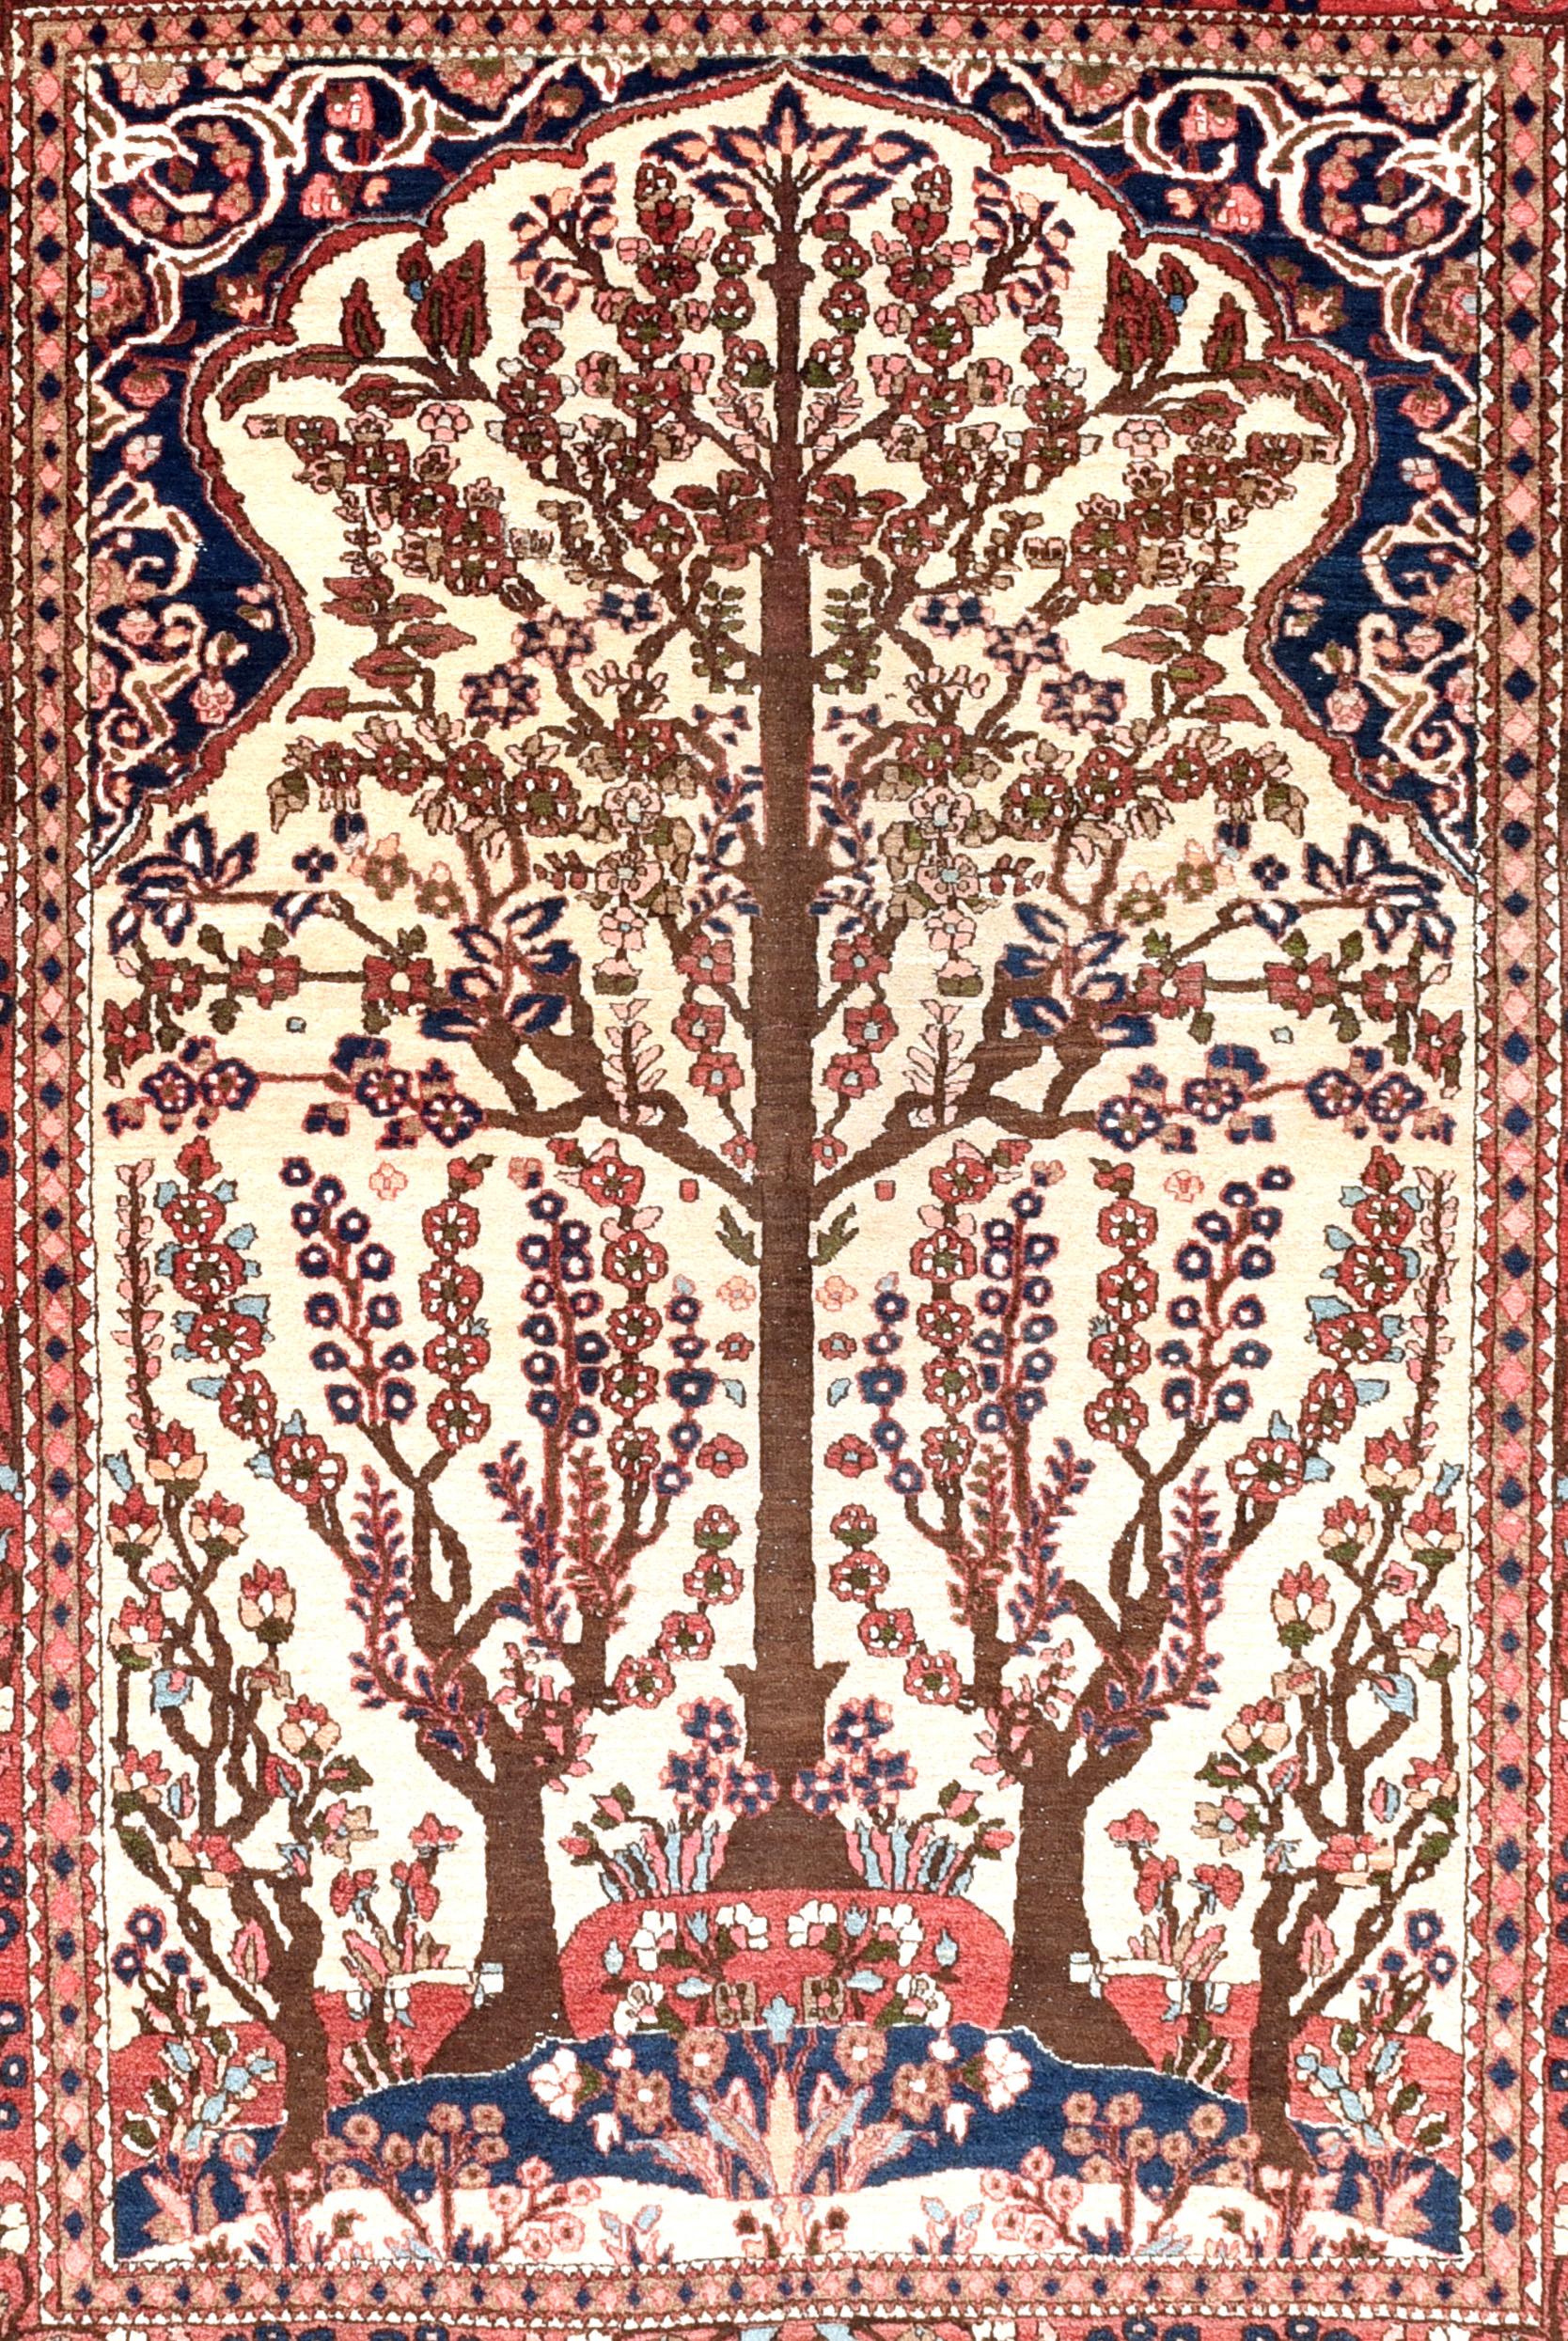 The Iranian city of Isfahan has long been one of the centres for production of the famous Persian carpet (or rug). Isfahani carpets are renowned for their high quality. The most famous workshop in Isfahan is Seirafian. In Europe they became